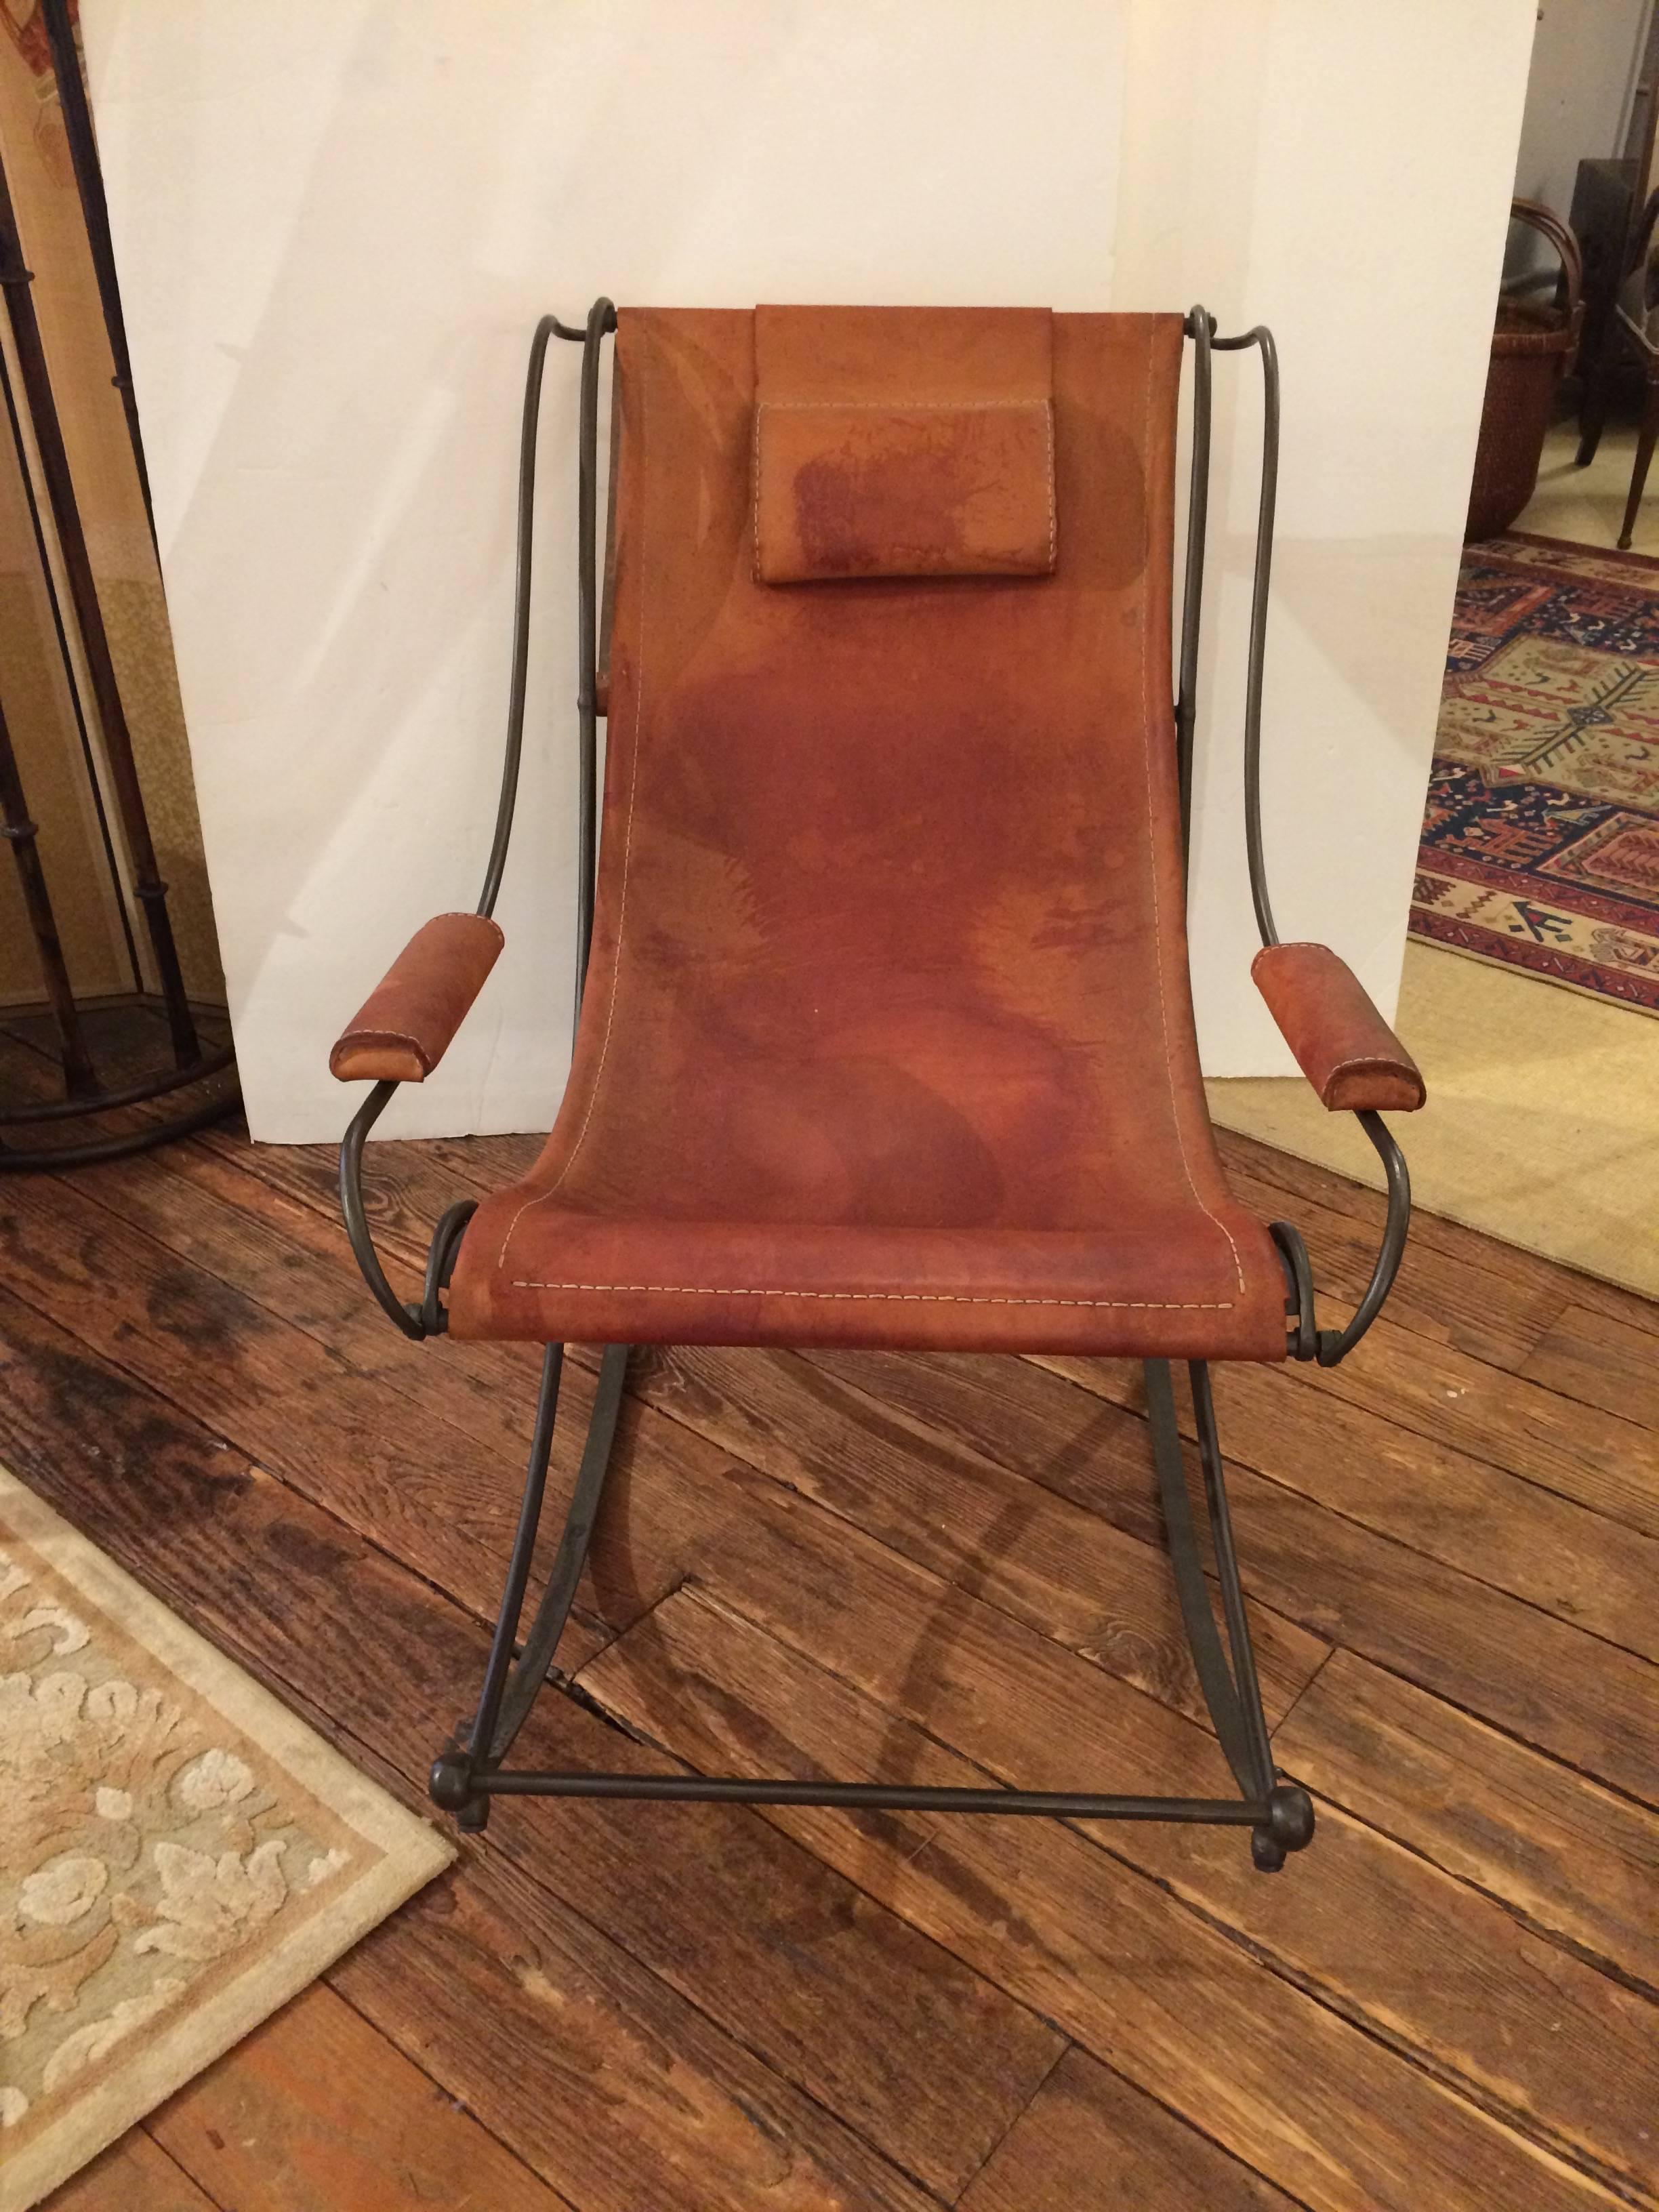 Chic sculptural rocking chair with wonderful Silhouette having a wrought iron base and cognac stitched heavy leather sling back designed seat, padded arms and headrest.